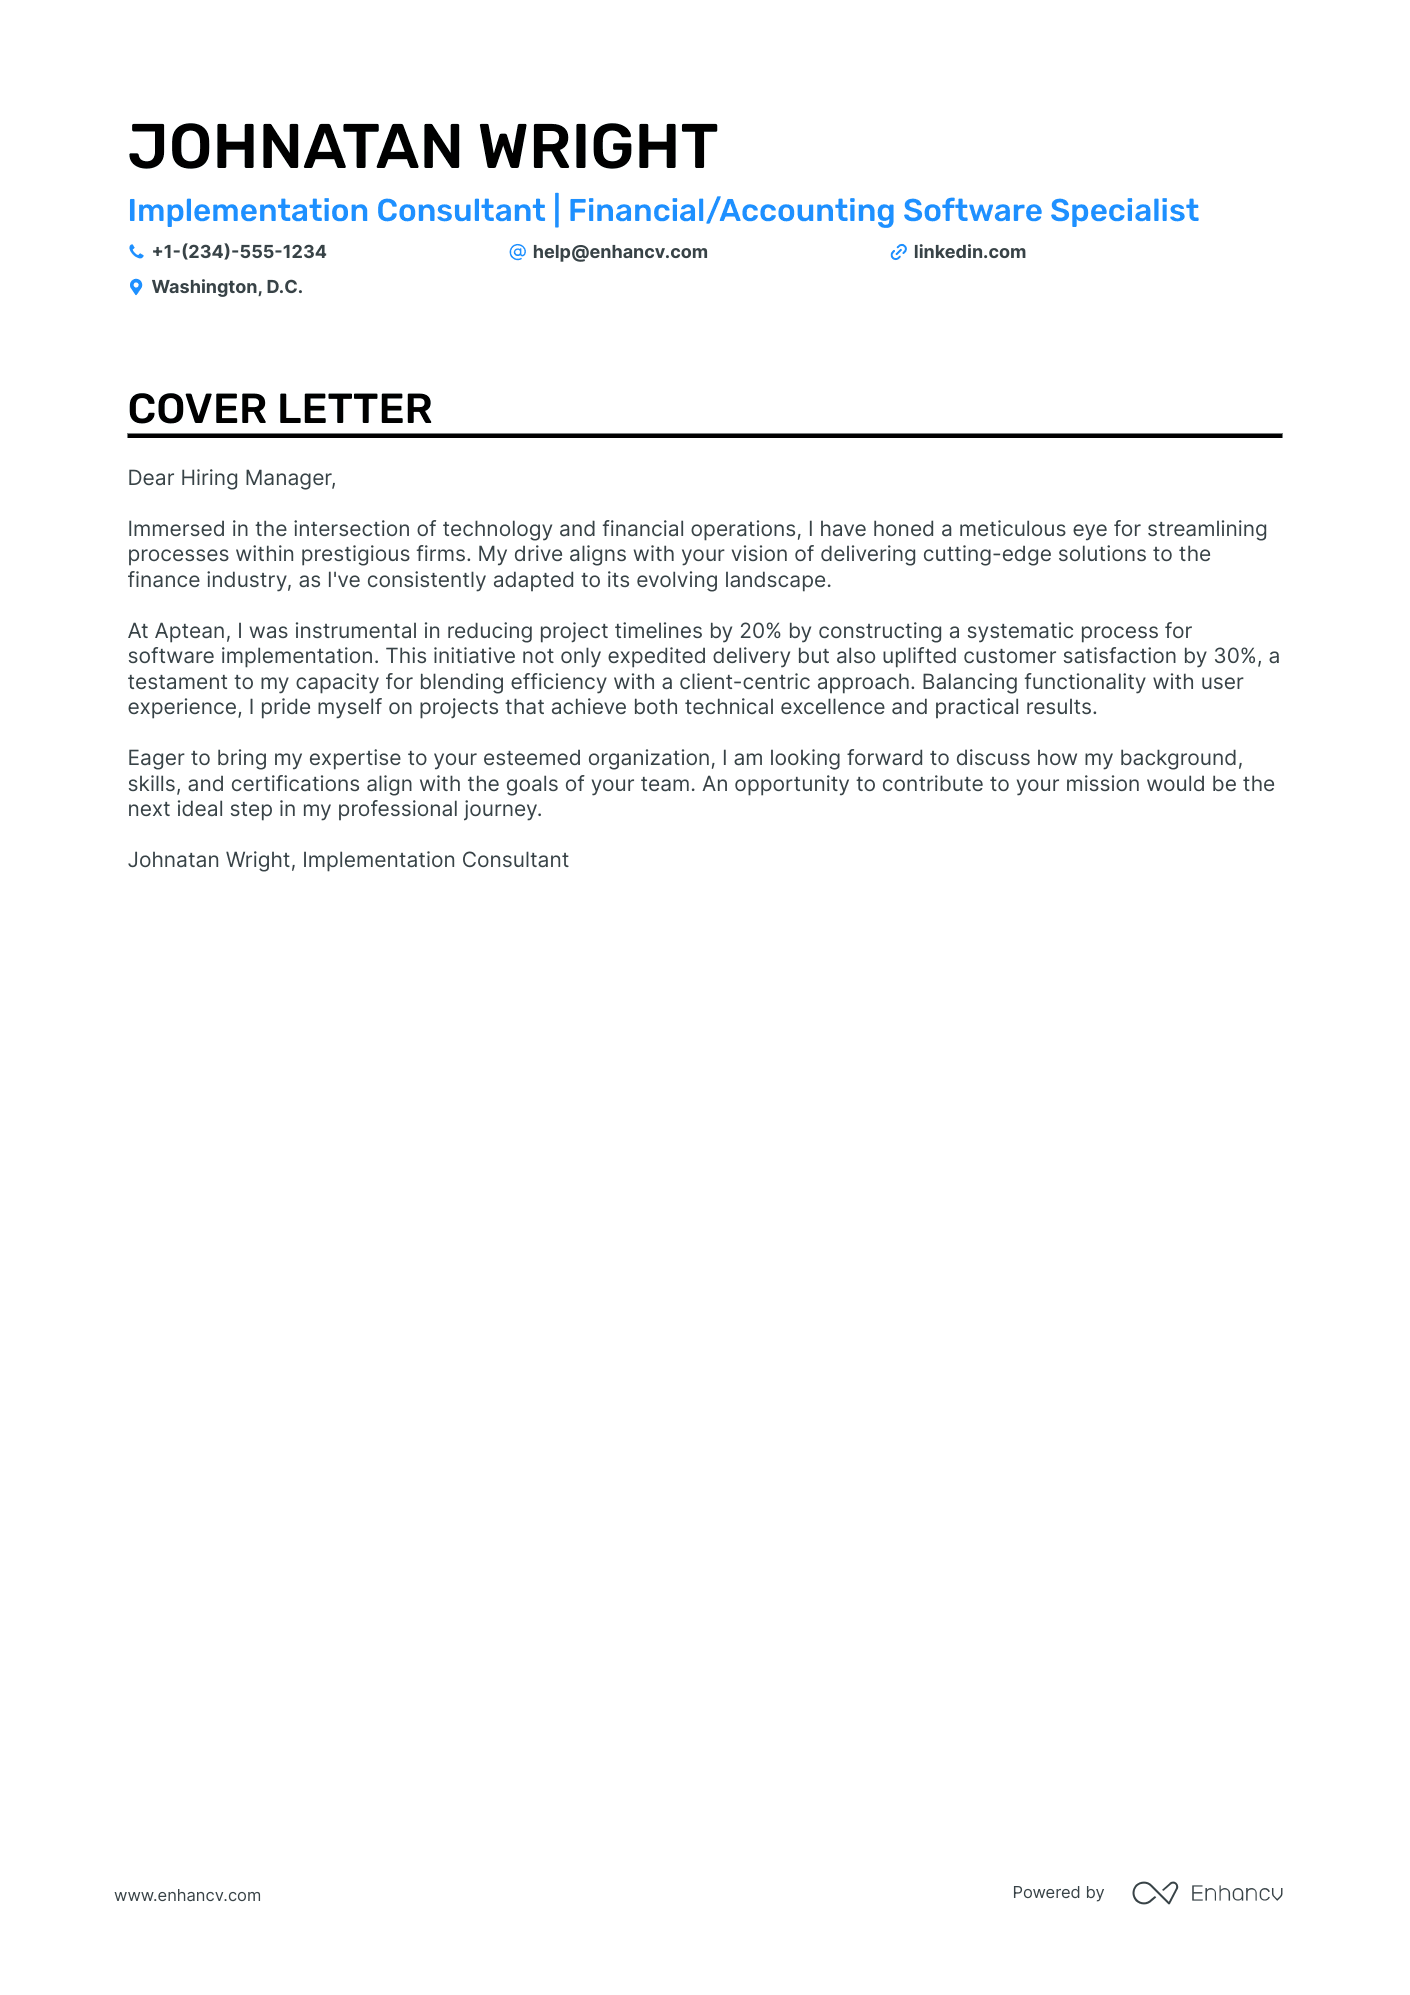 Implementation Consultant cover letter